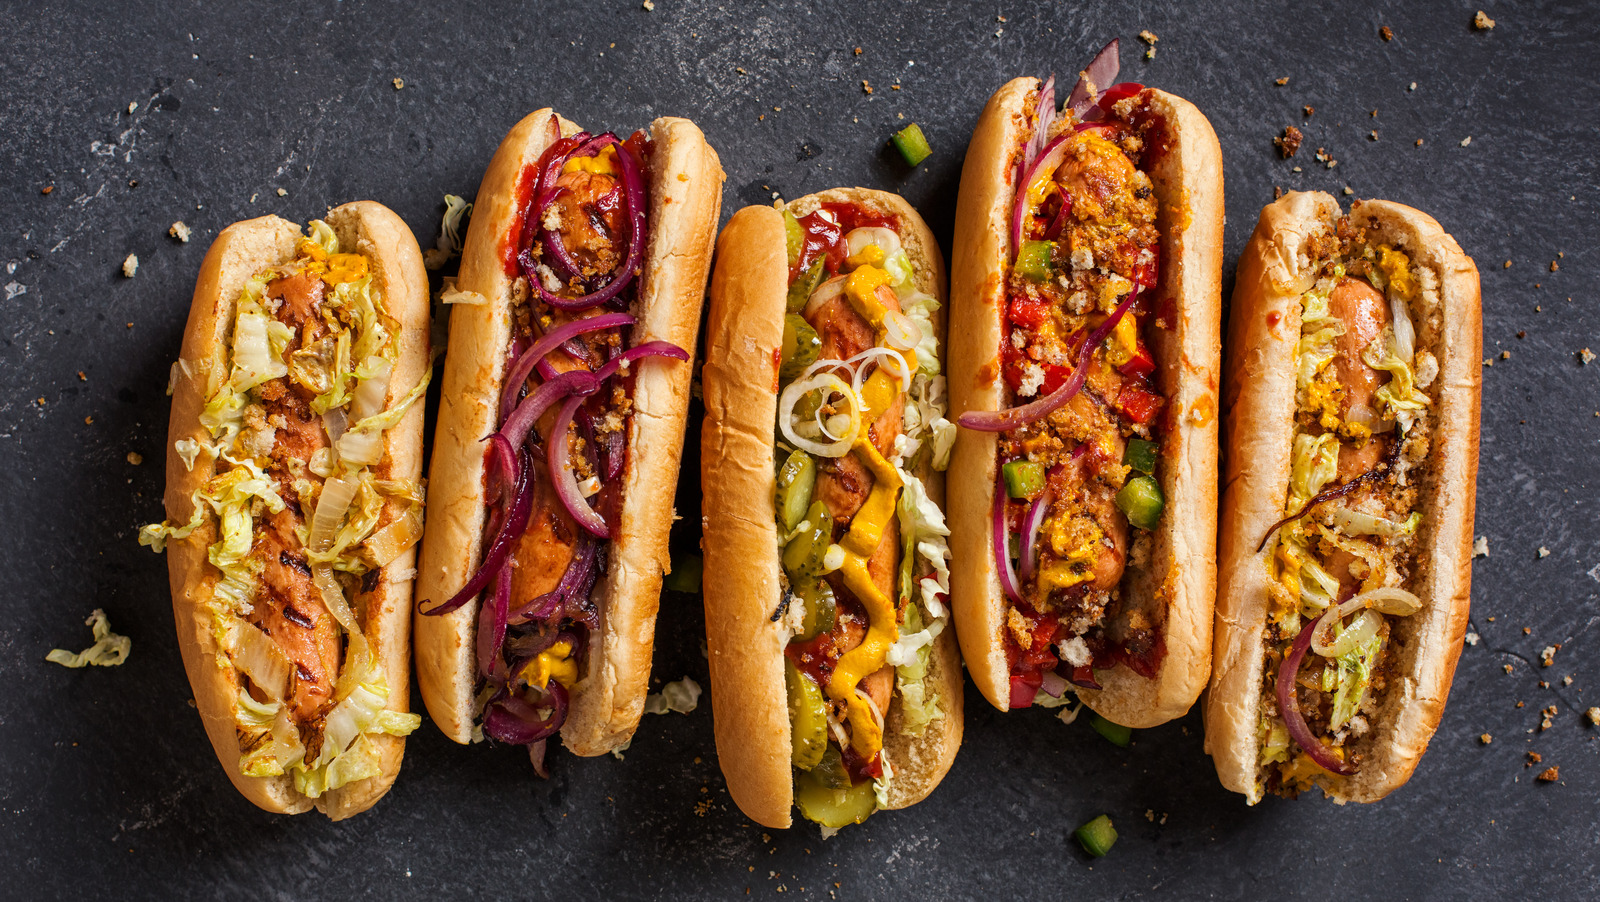 The Hot Dog Style You'll Only Find In Kansas City